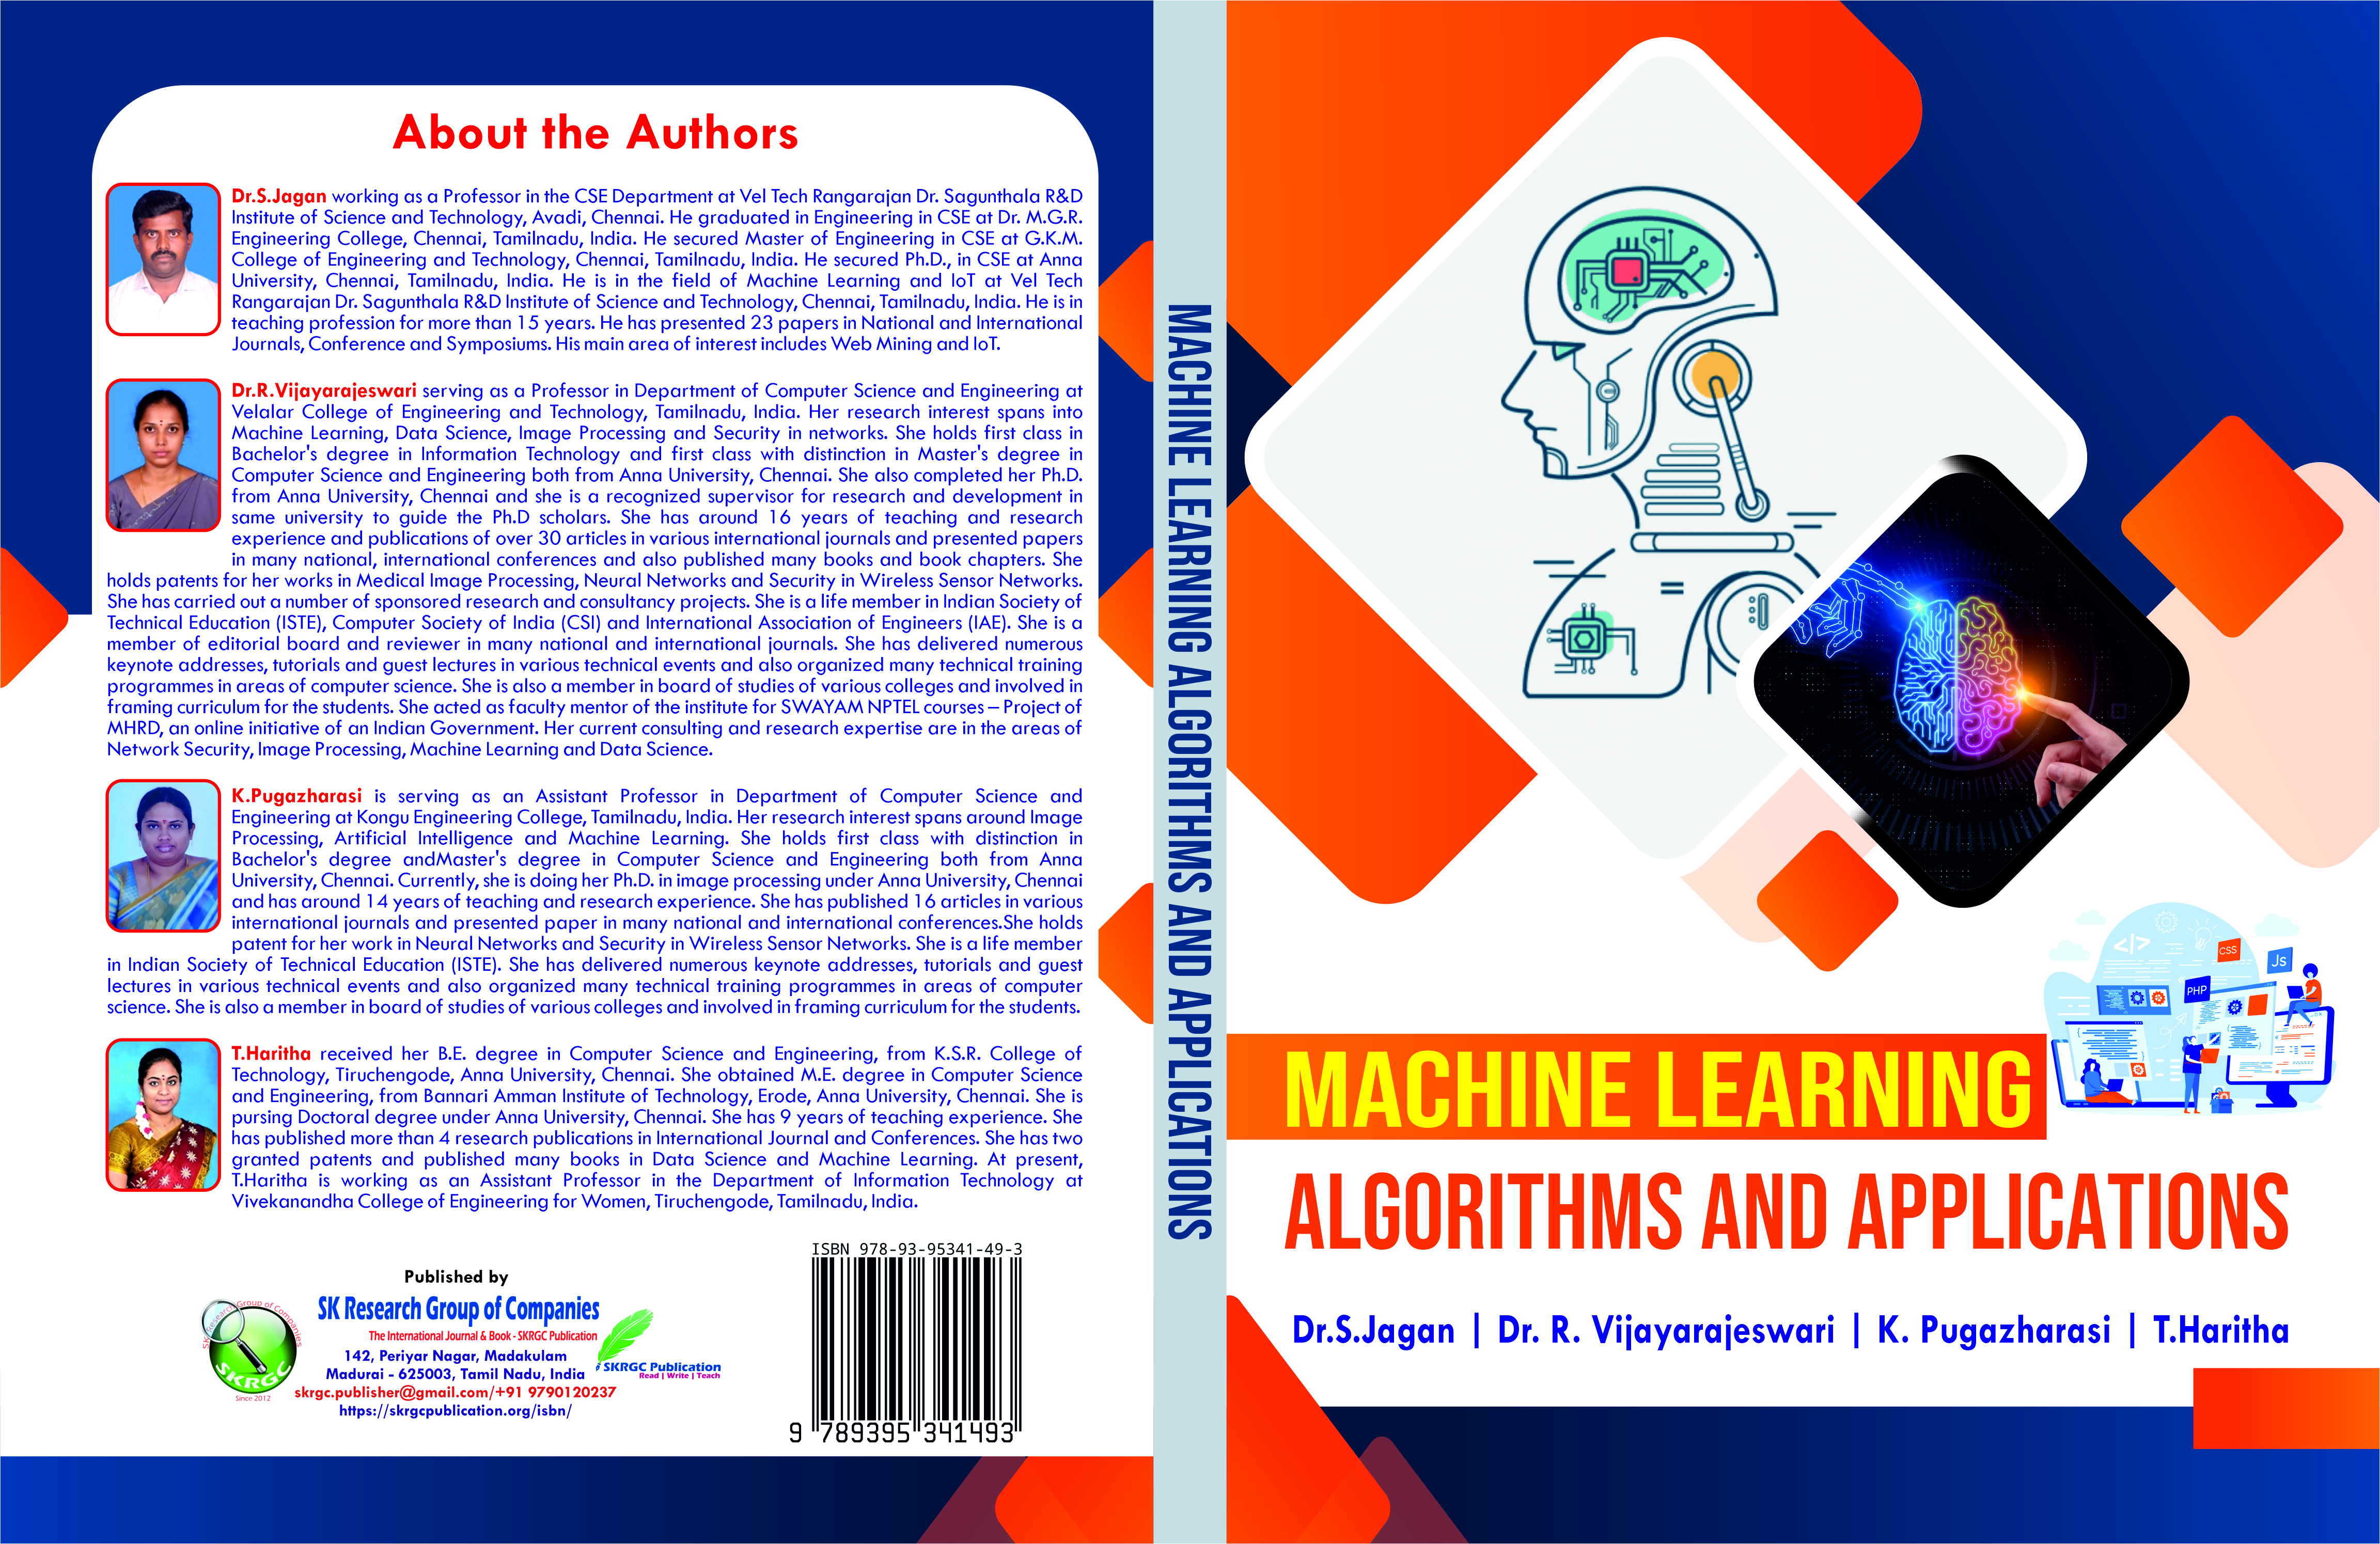 Machine Learning Algorithms and Applications